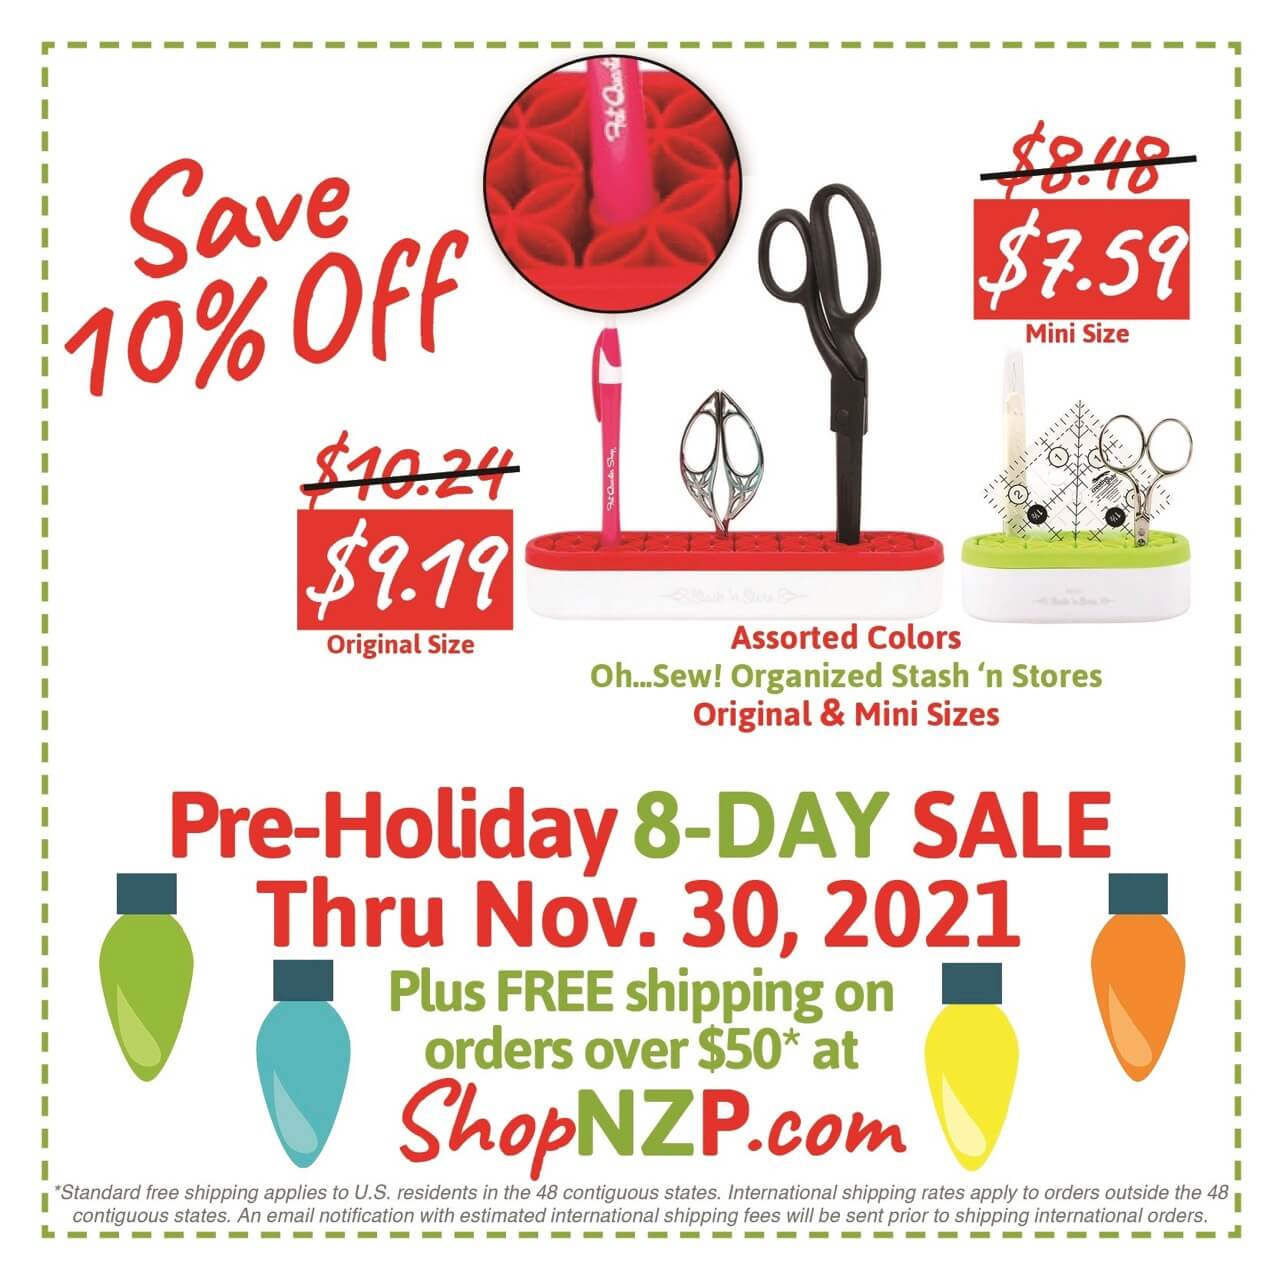 Save 10 Percent Off Oh Sew! Organized Stash 'n Stores at Nancy Zieman Productions at ShopNZP.com Sale Nov 23-30, 2021